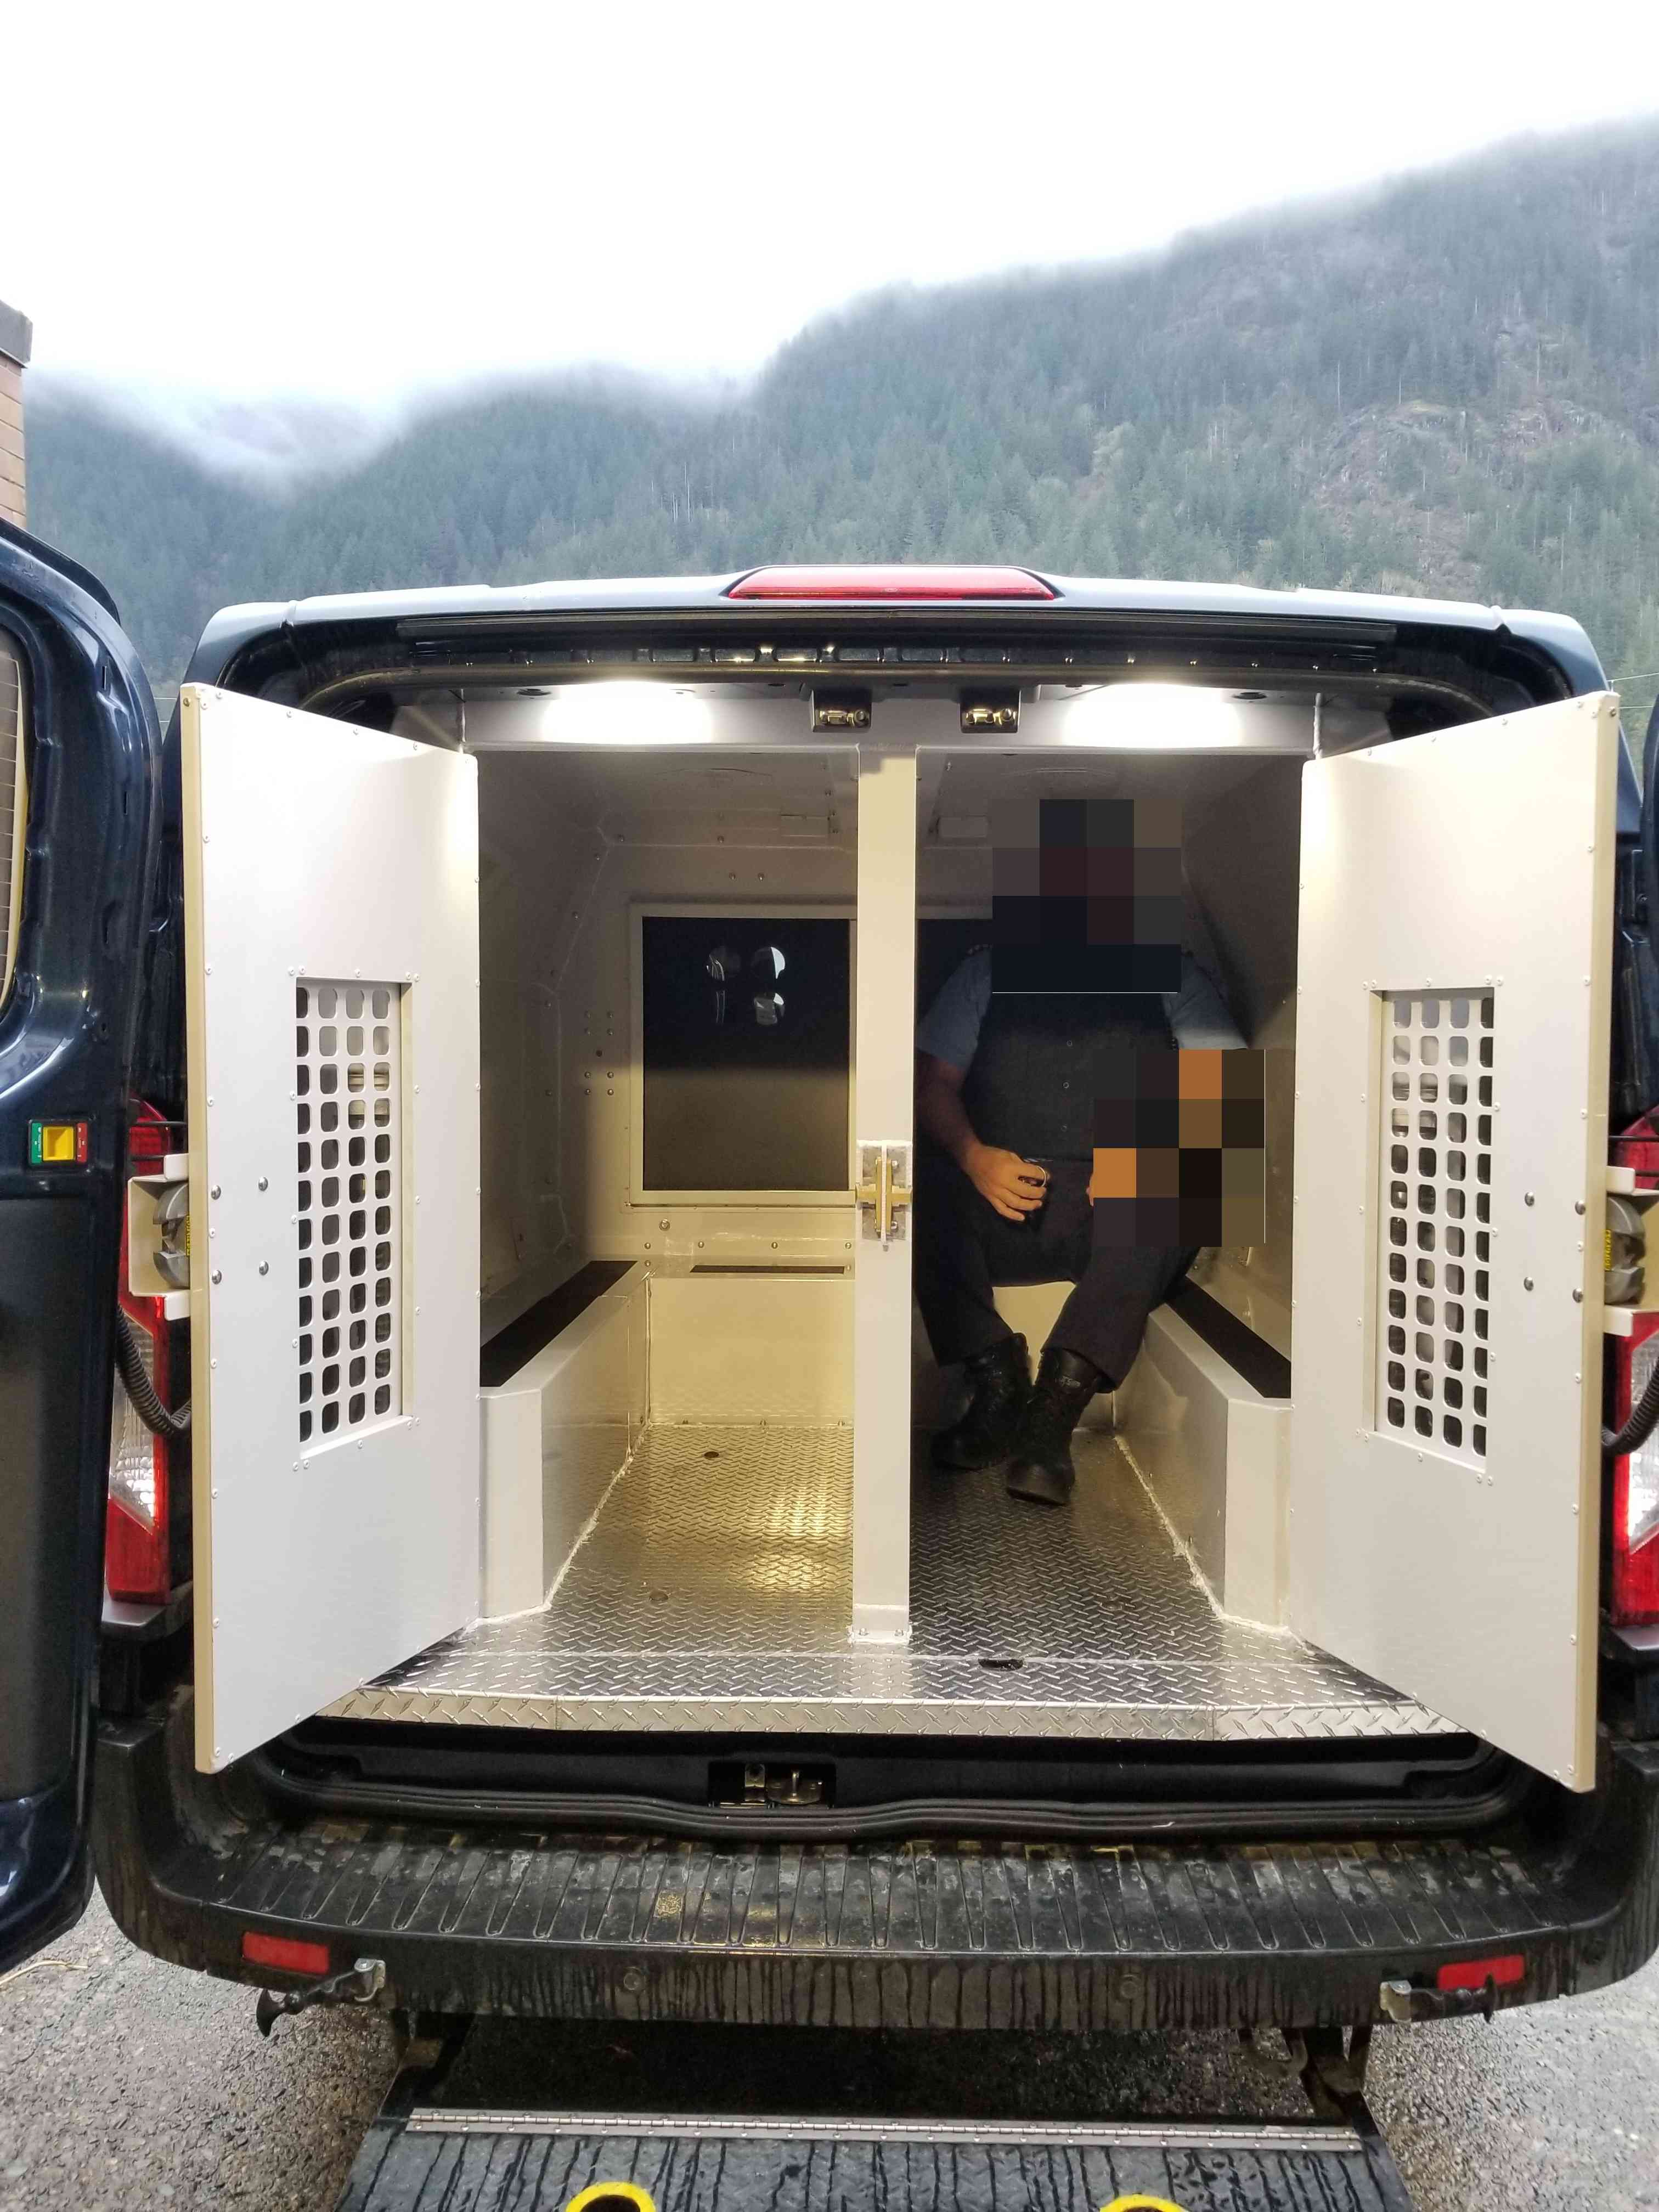 Rear photo of a CSC prisoner transport vehicle with a male guard seated inside the prisoner compartment.